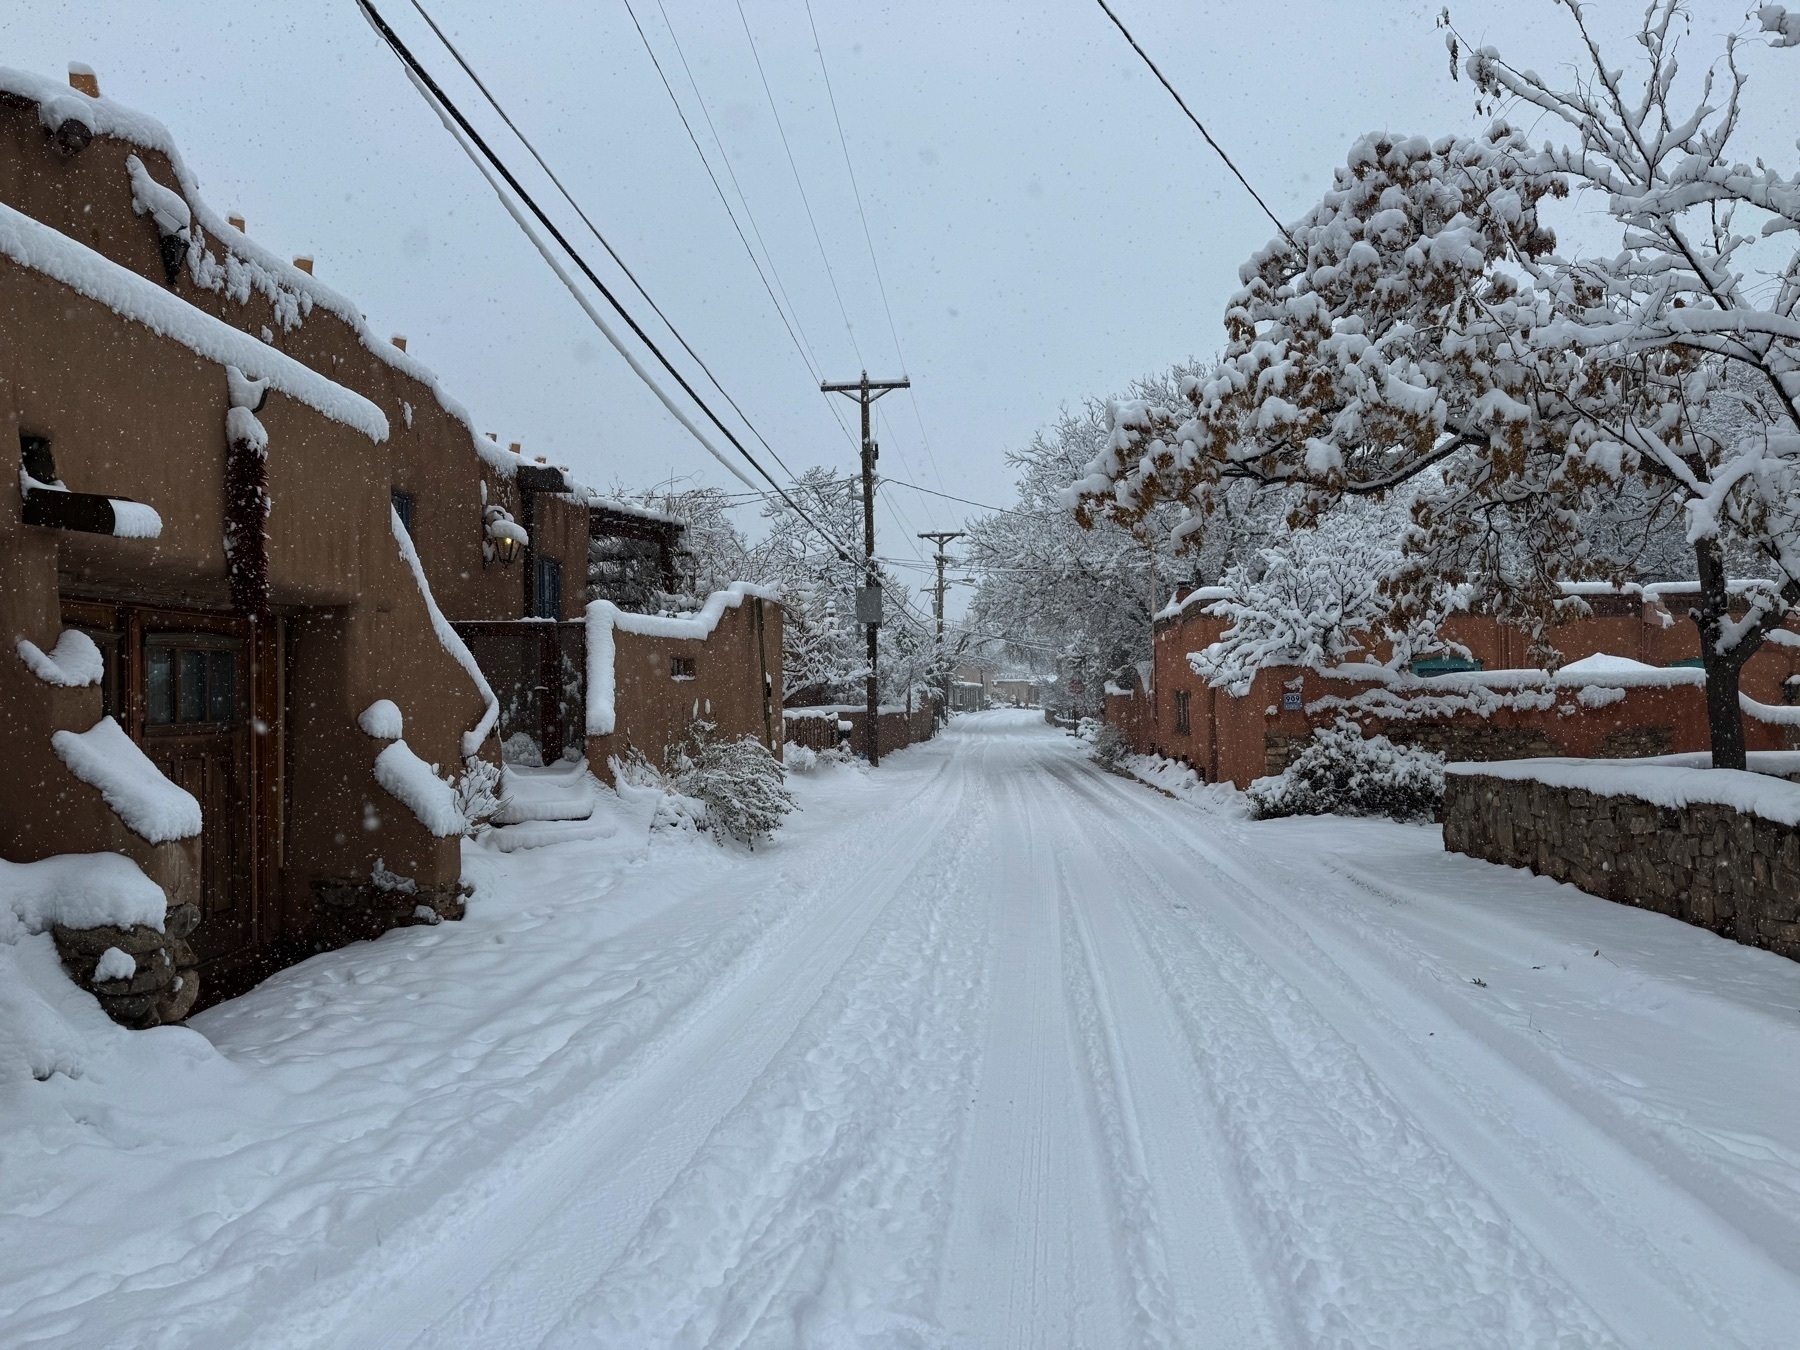 Heavy snow covering everything on Canyon Road in Santa Fe with no people in sight